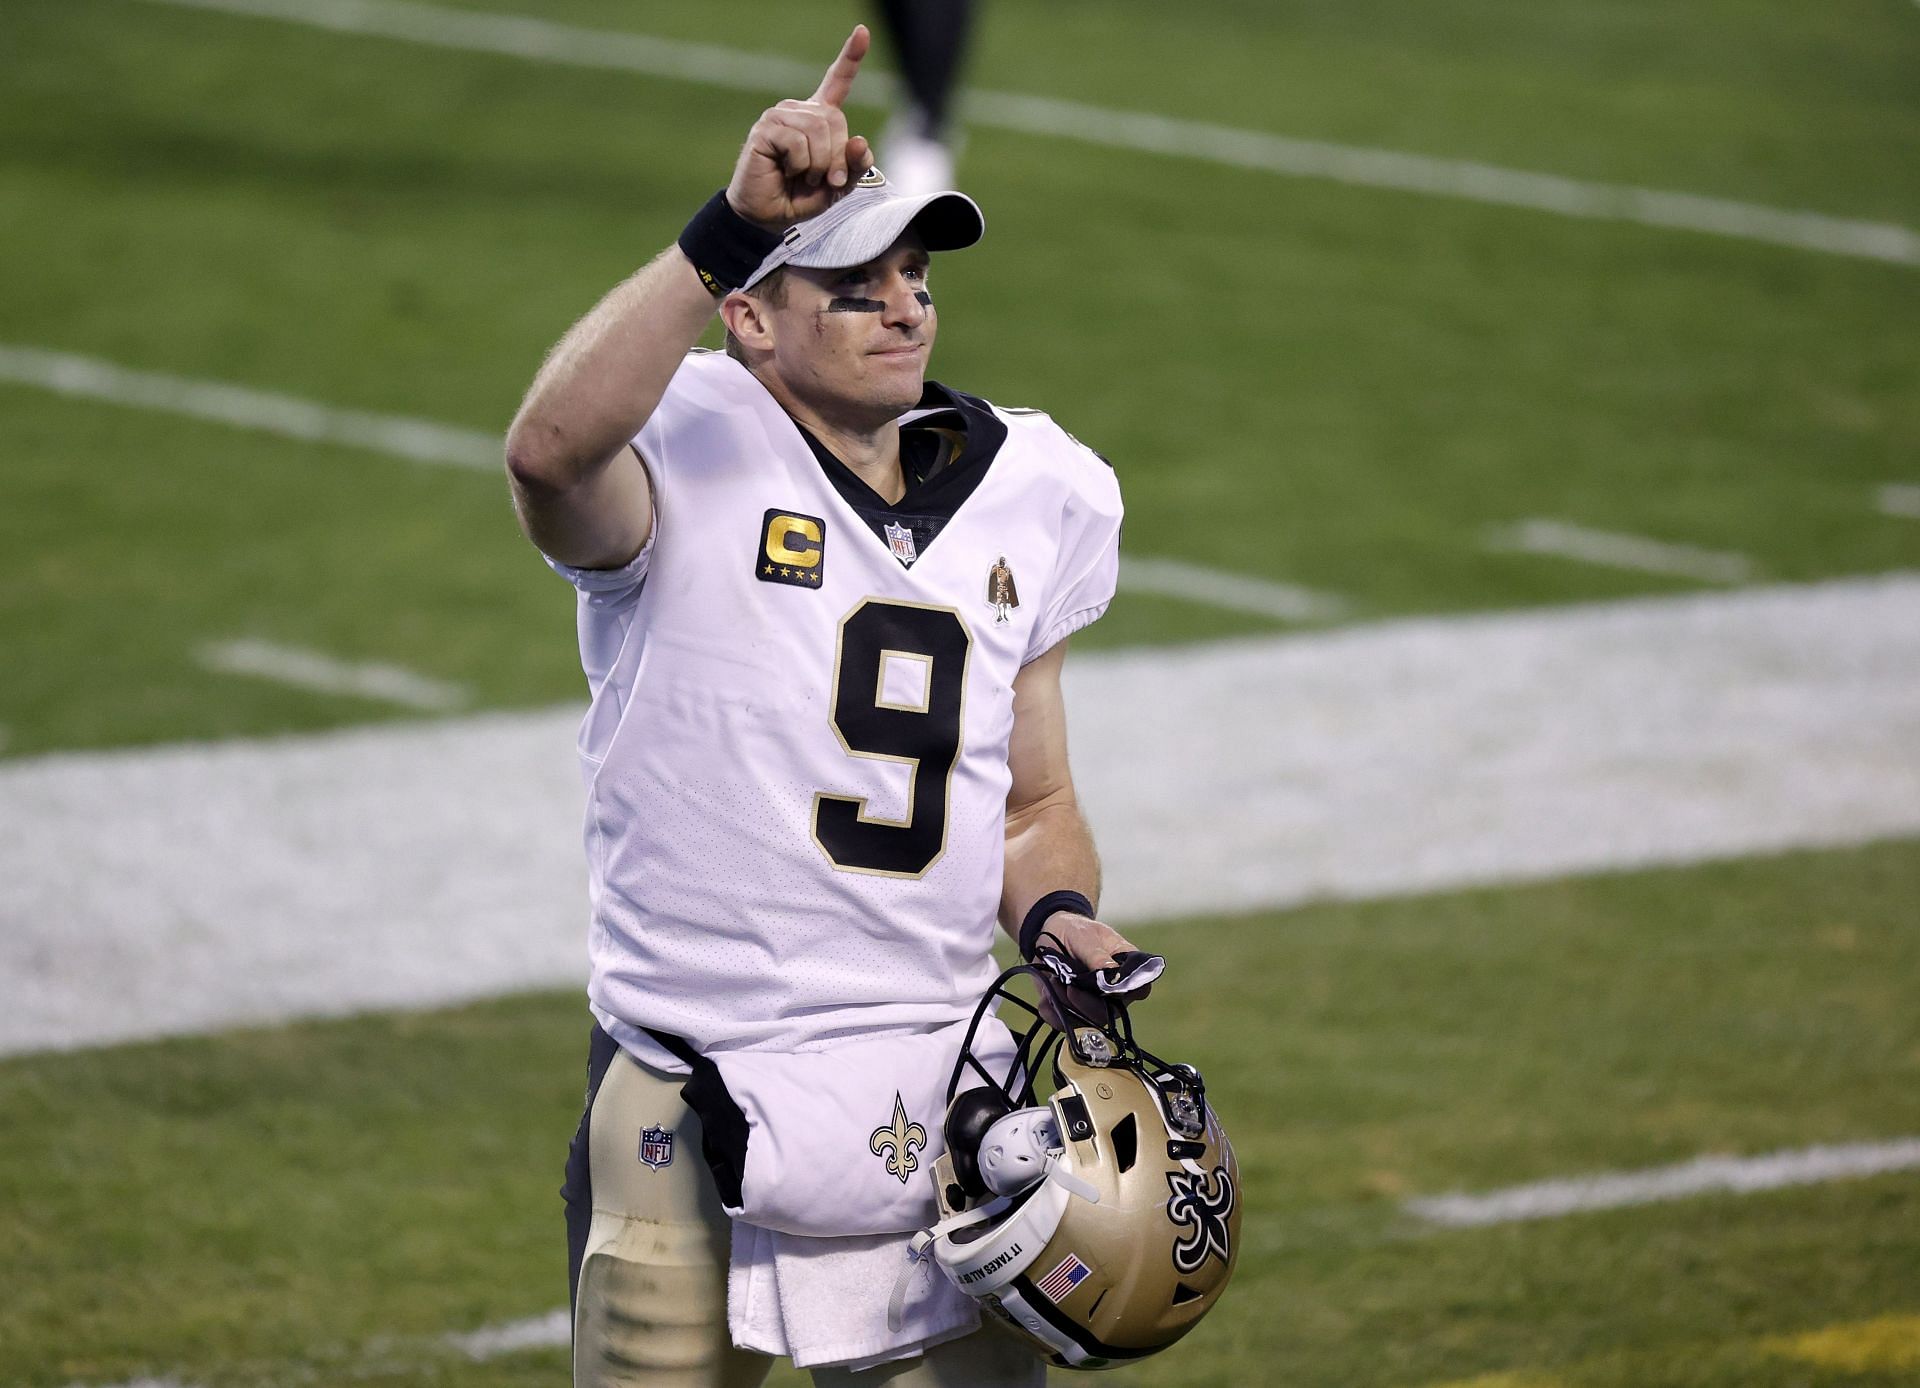 Might Drew Brees return to the NFL?